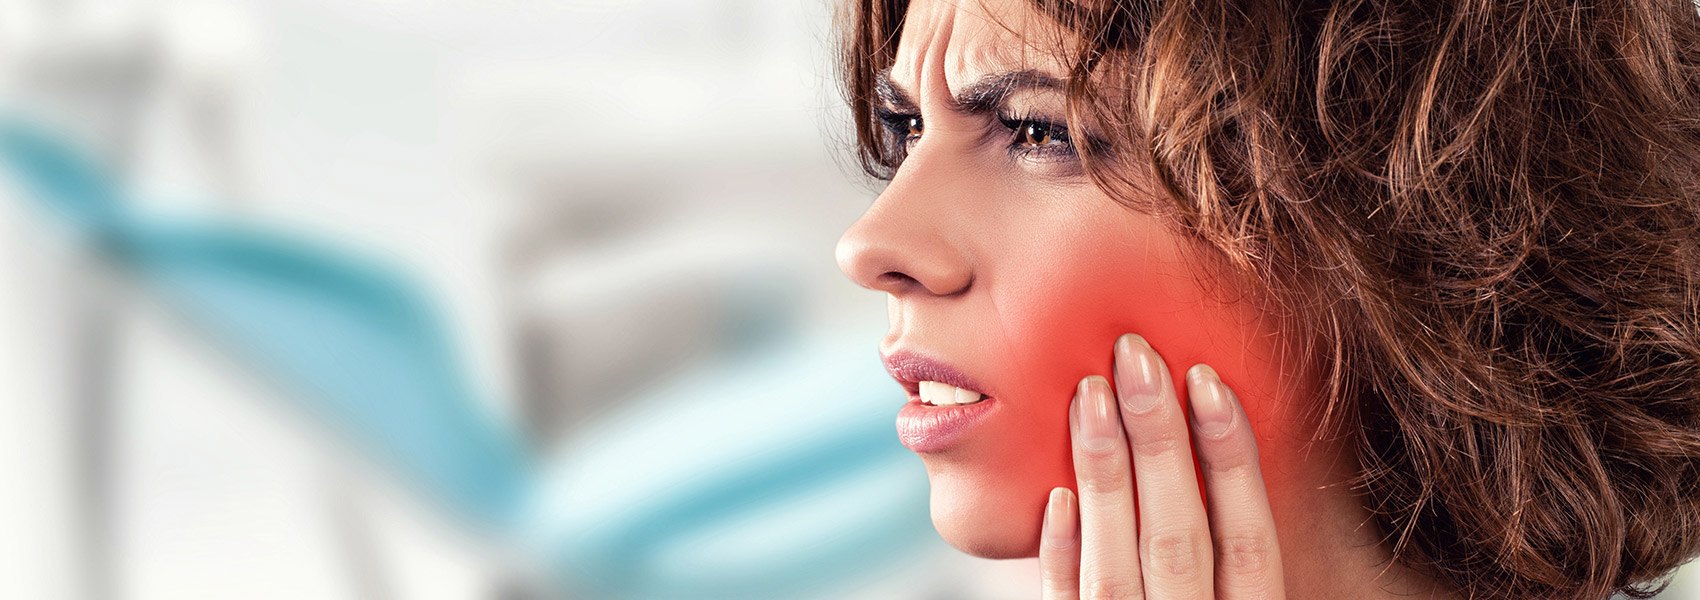 Woman in tooth pain